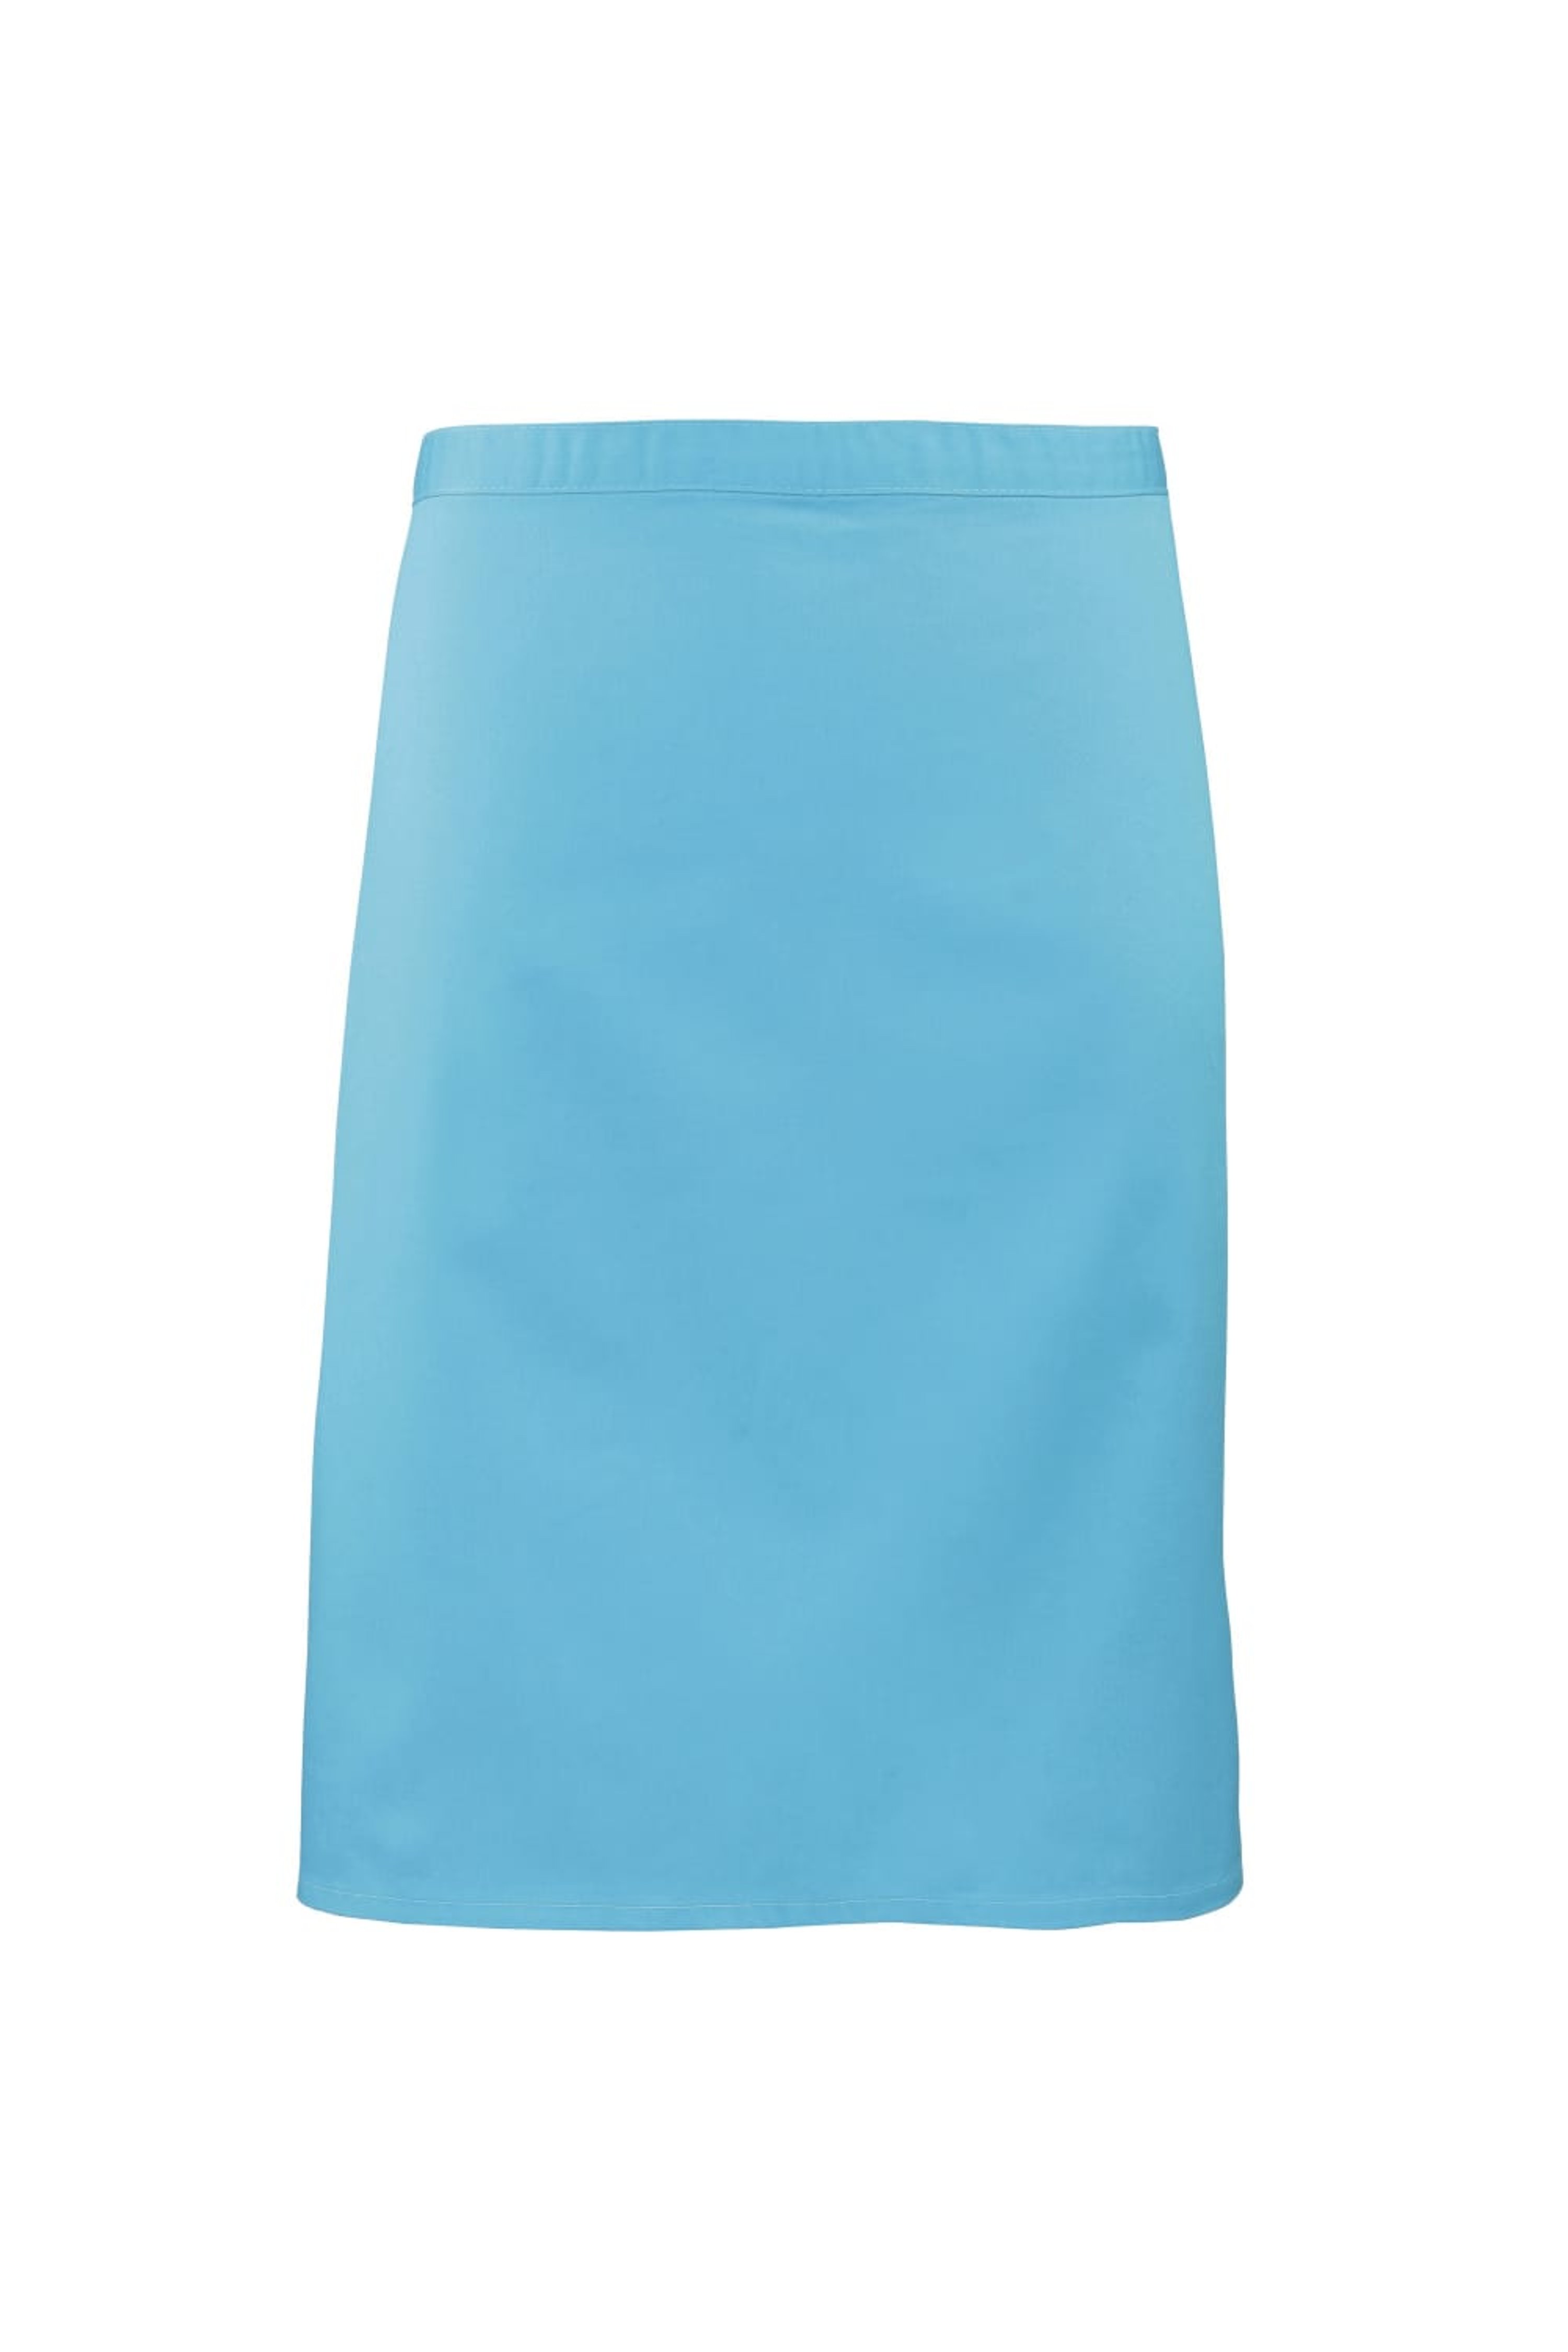 PREMIER PREMIER LADIES/WOMENS MID-LENGTH APRON (PACK OF 2) (TURQUOISE) (ONE SIZE)